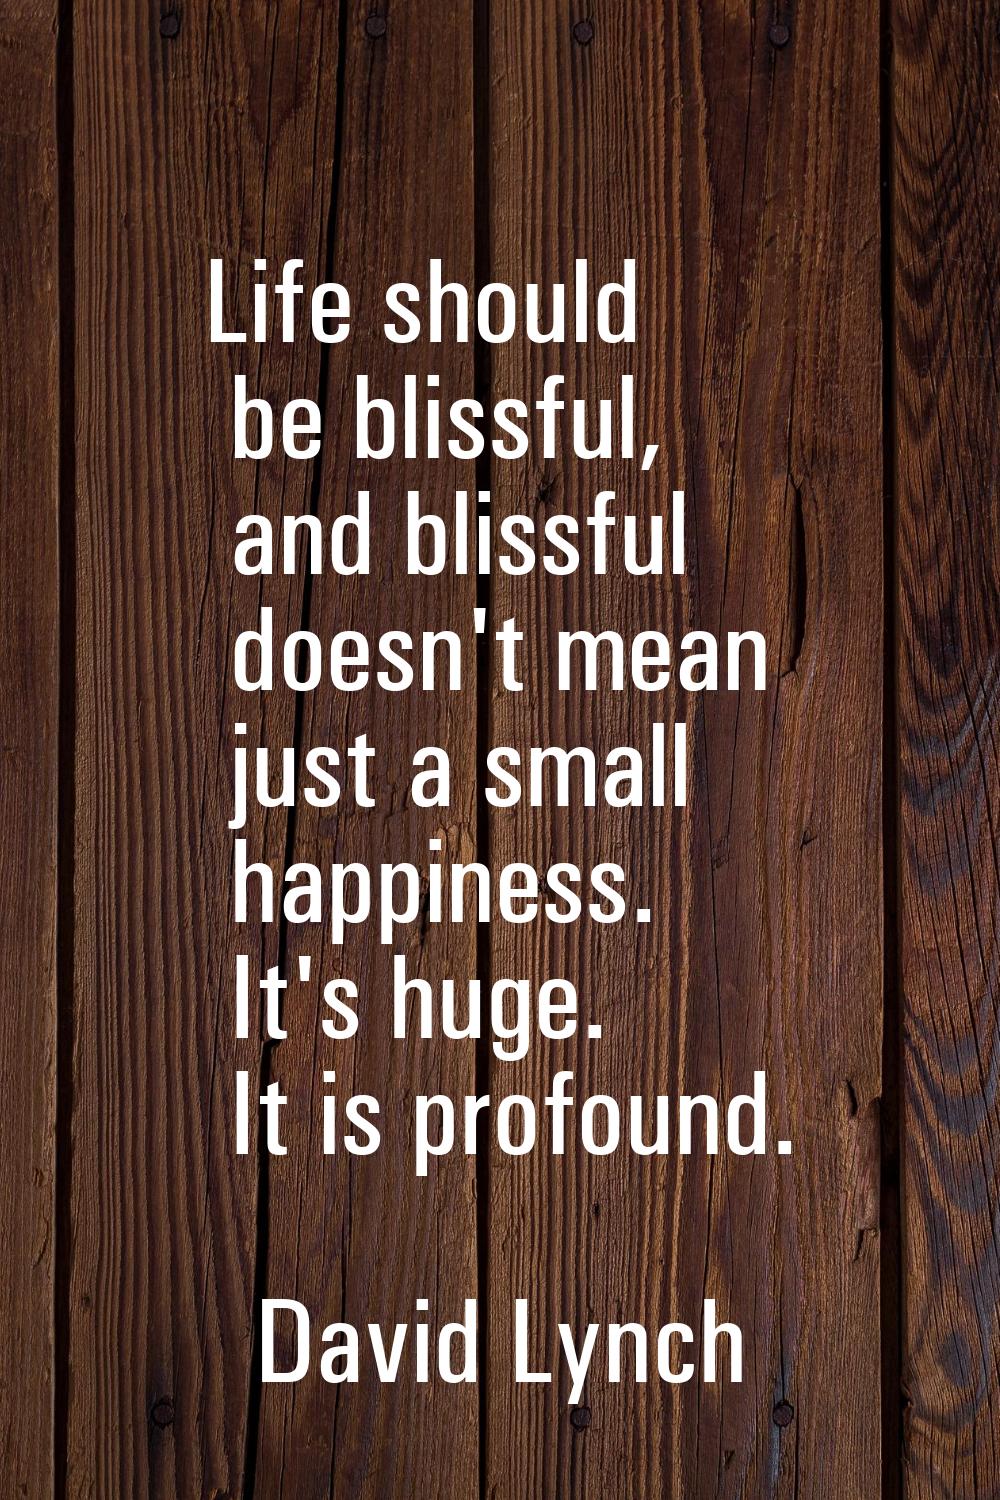 Life should be blissful, and blissful doesn't mean just a small happiness. It's huge. It is profoun